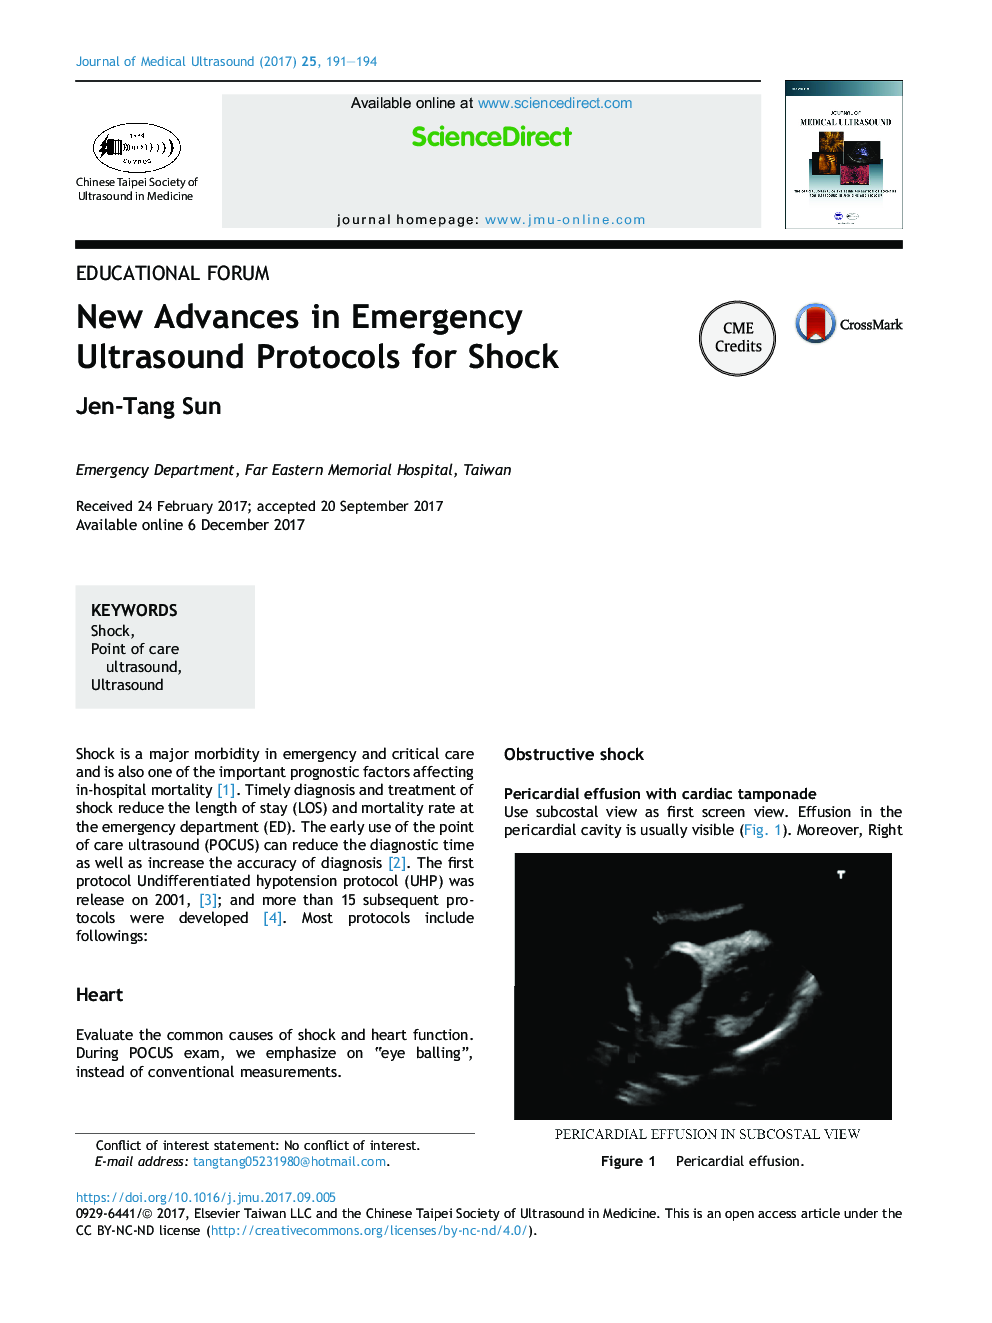 New Advances in Emergency Ultrasound Protocols for Shock